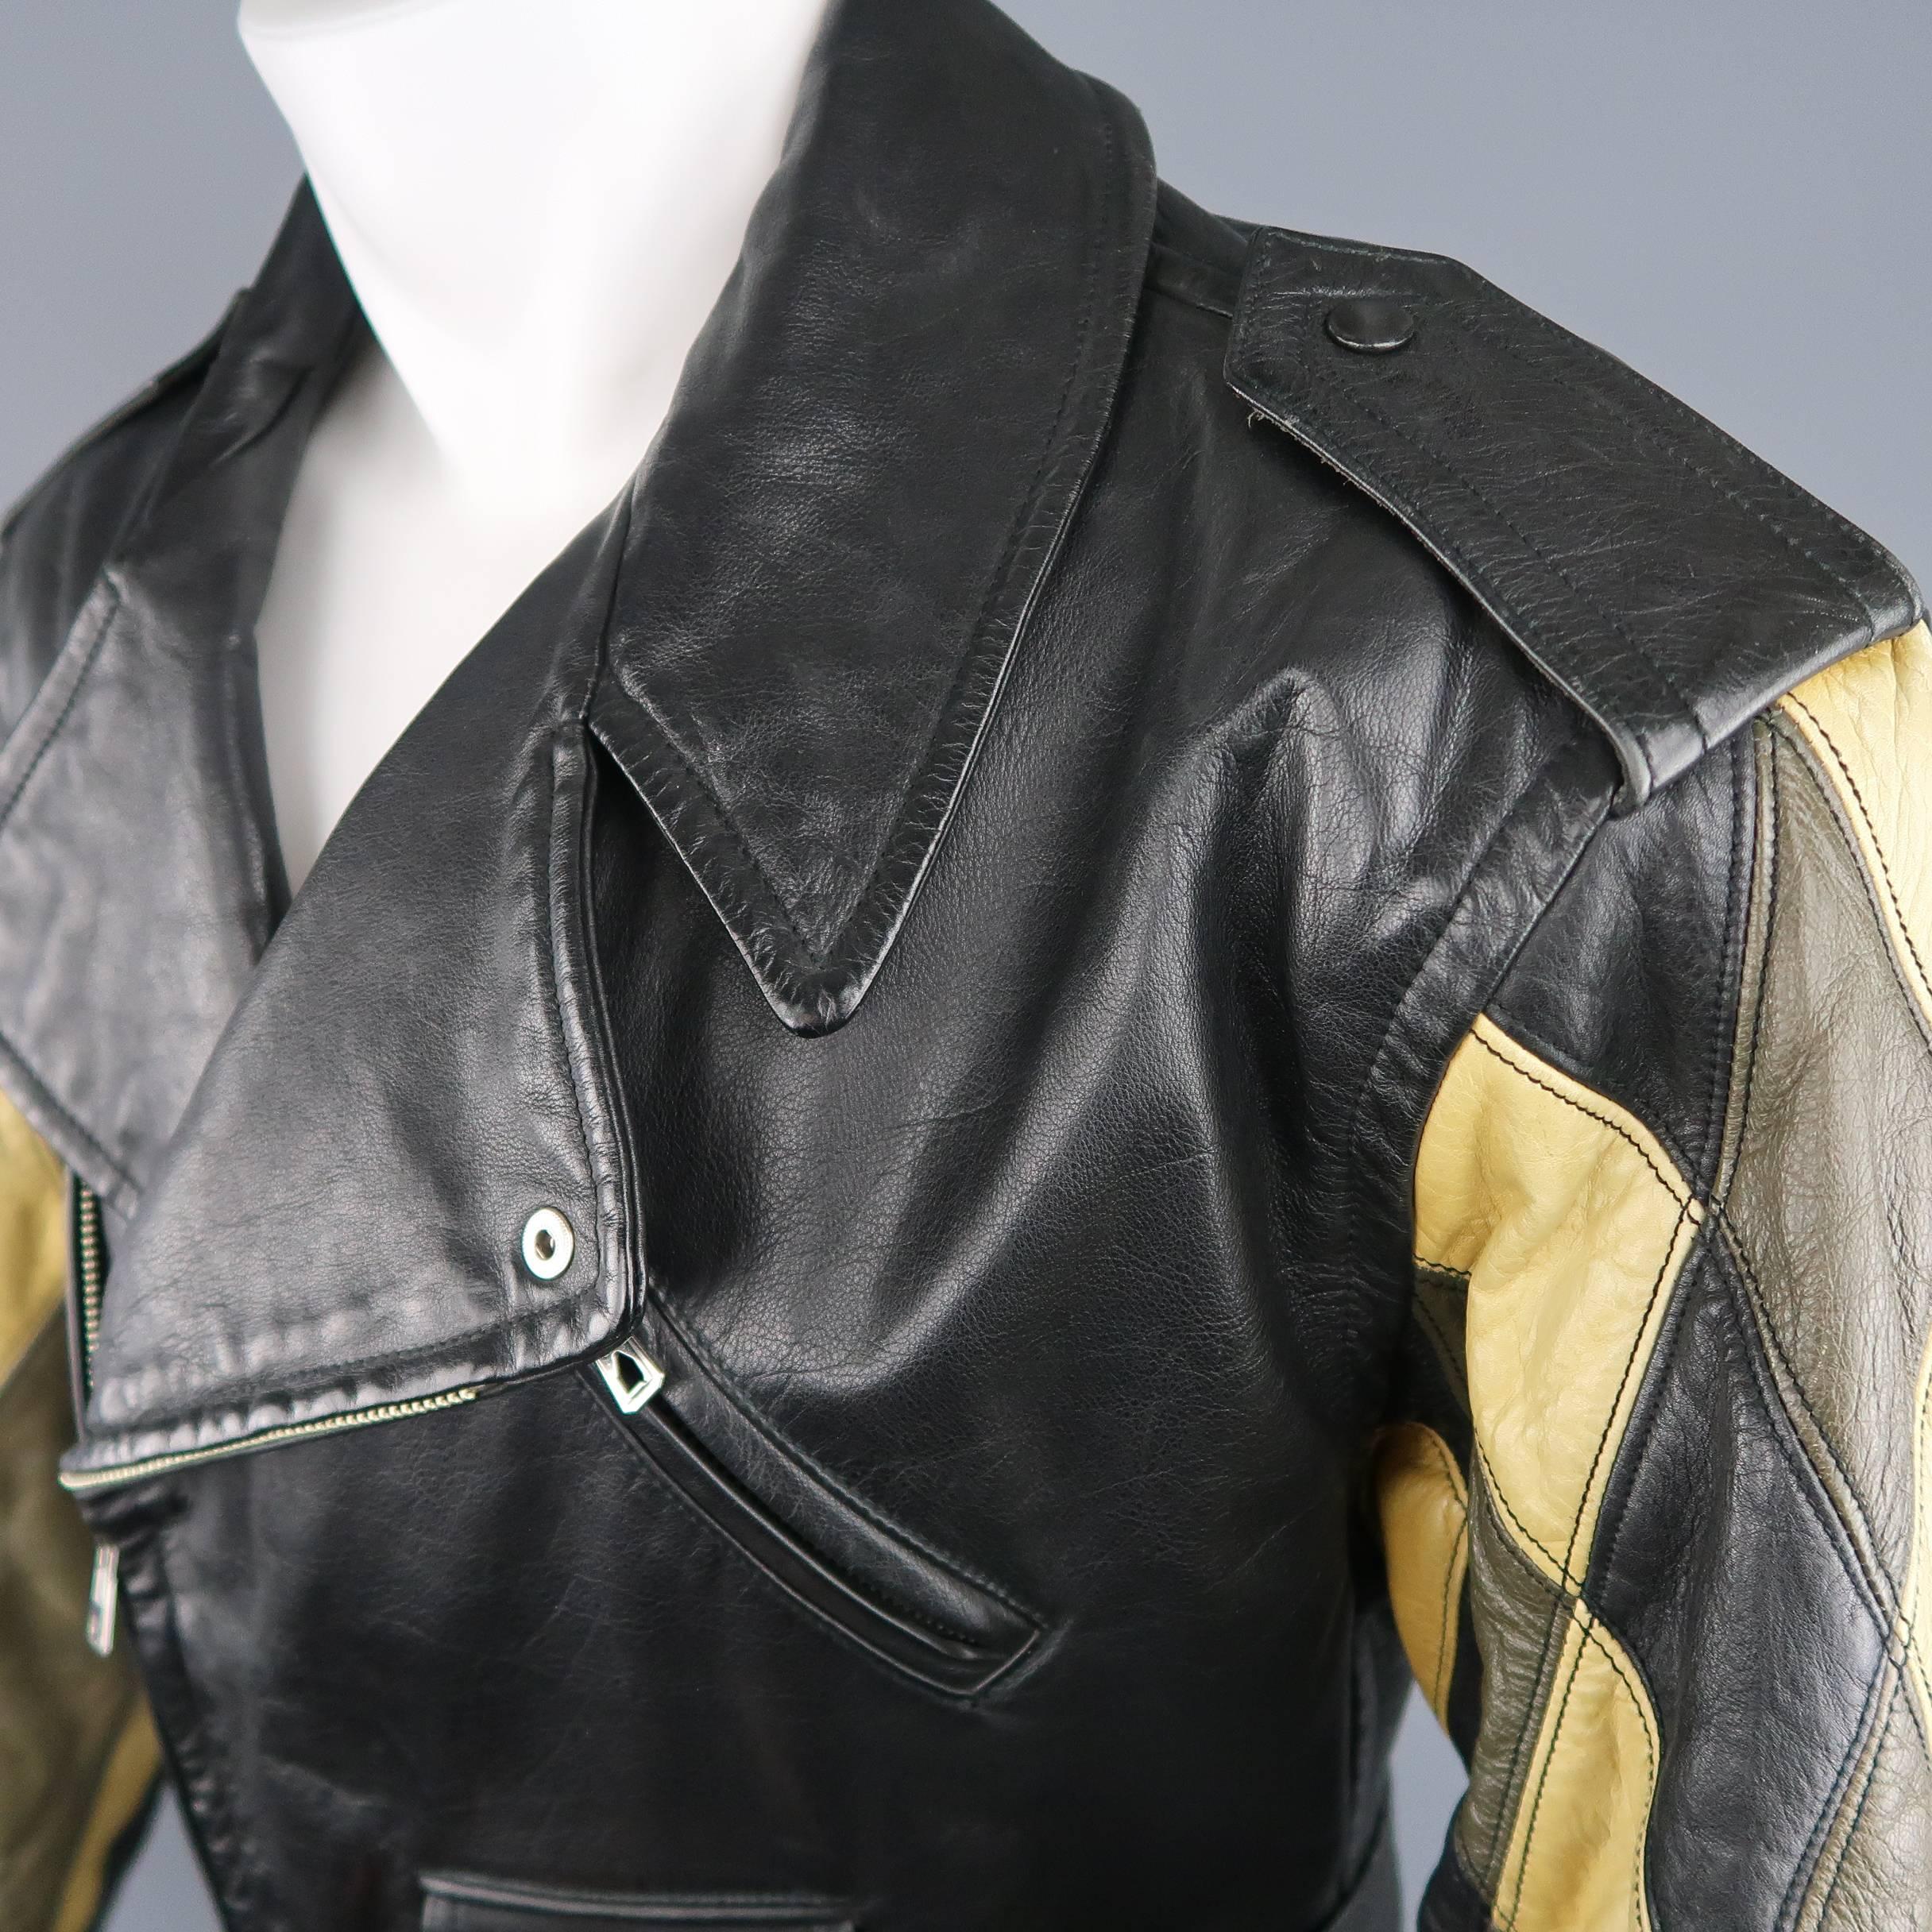 Vintage 1980's JEAN PAUL GAULTIER motorcycle style jacket comes in black structured leather and features a pointed collar lapel, asymmetrical zip closure, belted waist, zip pockets, signature back tab, and olive green and beige patchwork diamond